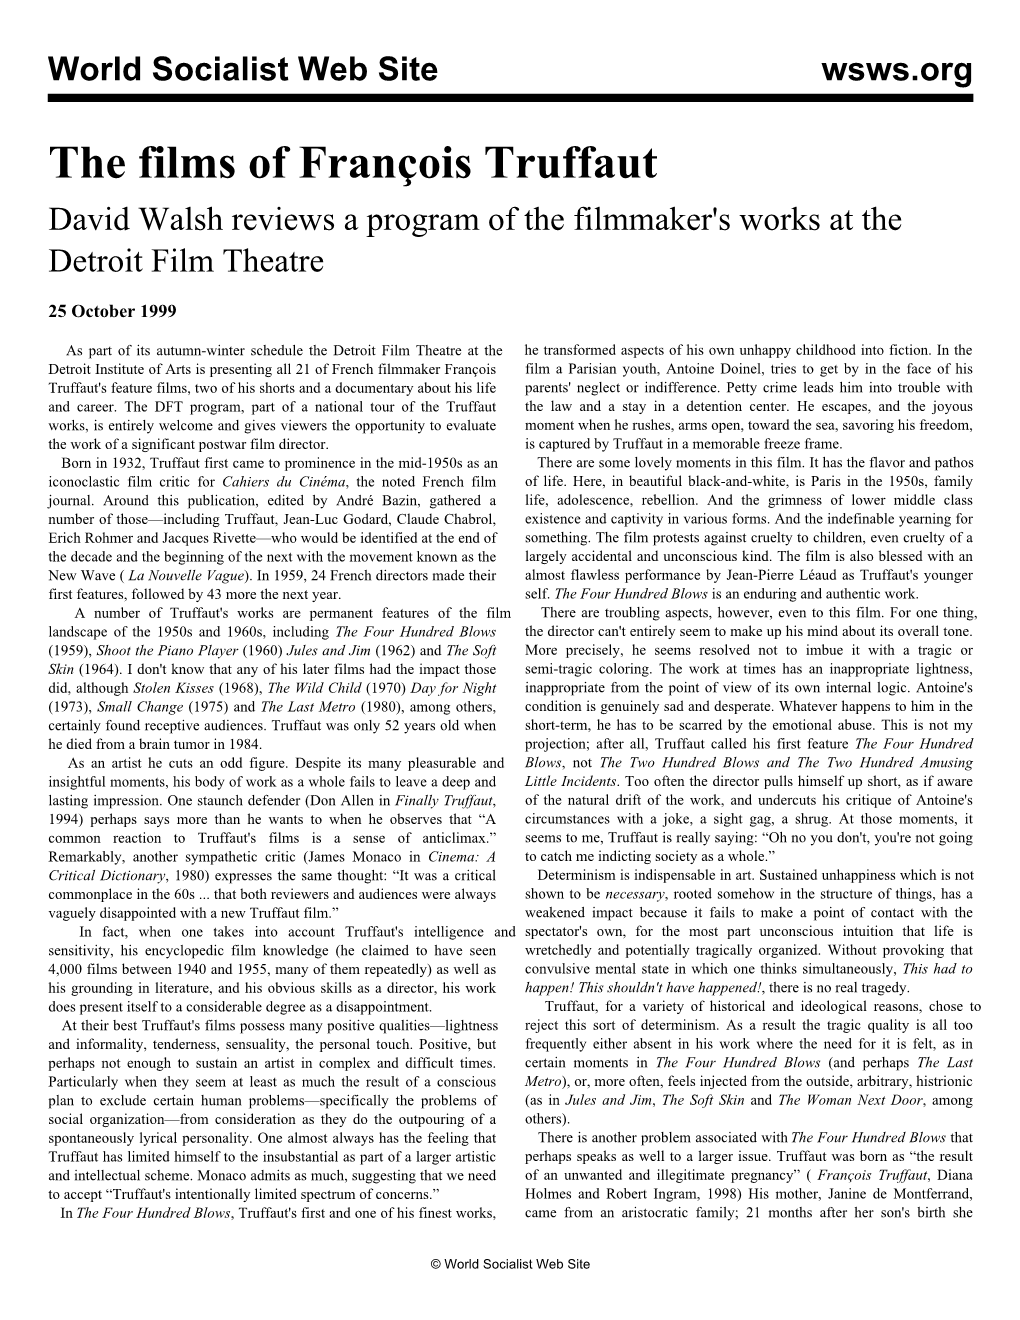 The Films of François Truffaut David Walsh Reviews a Program of the Filmmaker's Works at the Detroit Film Theatre